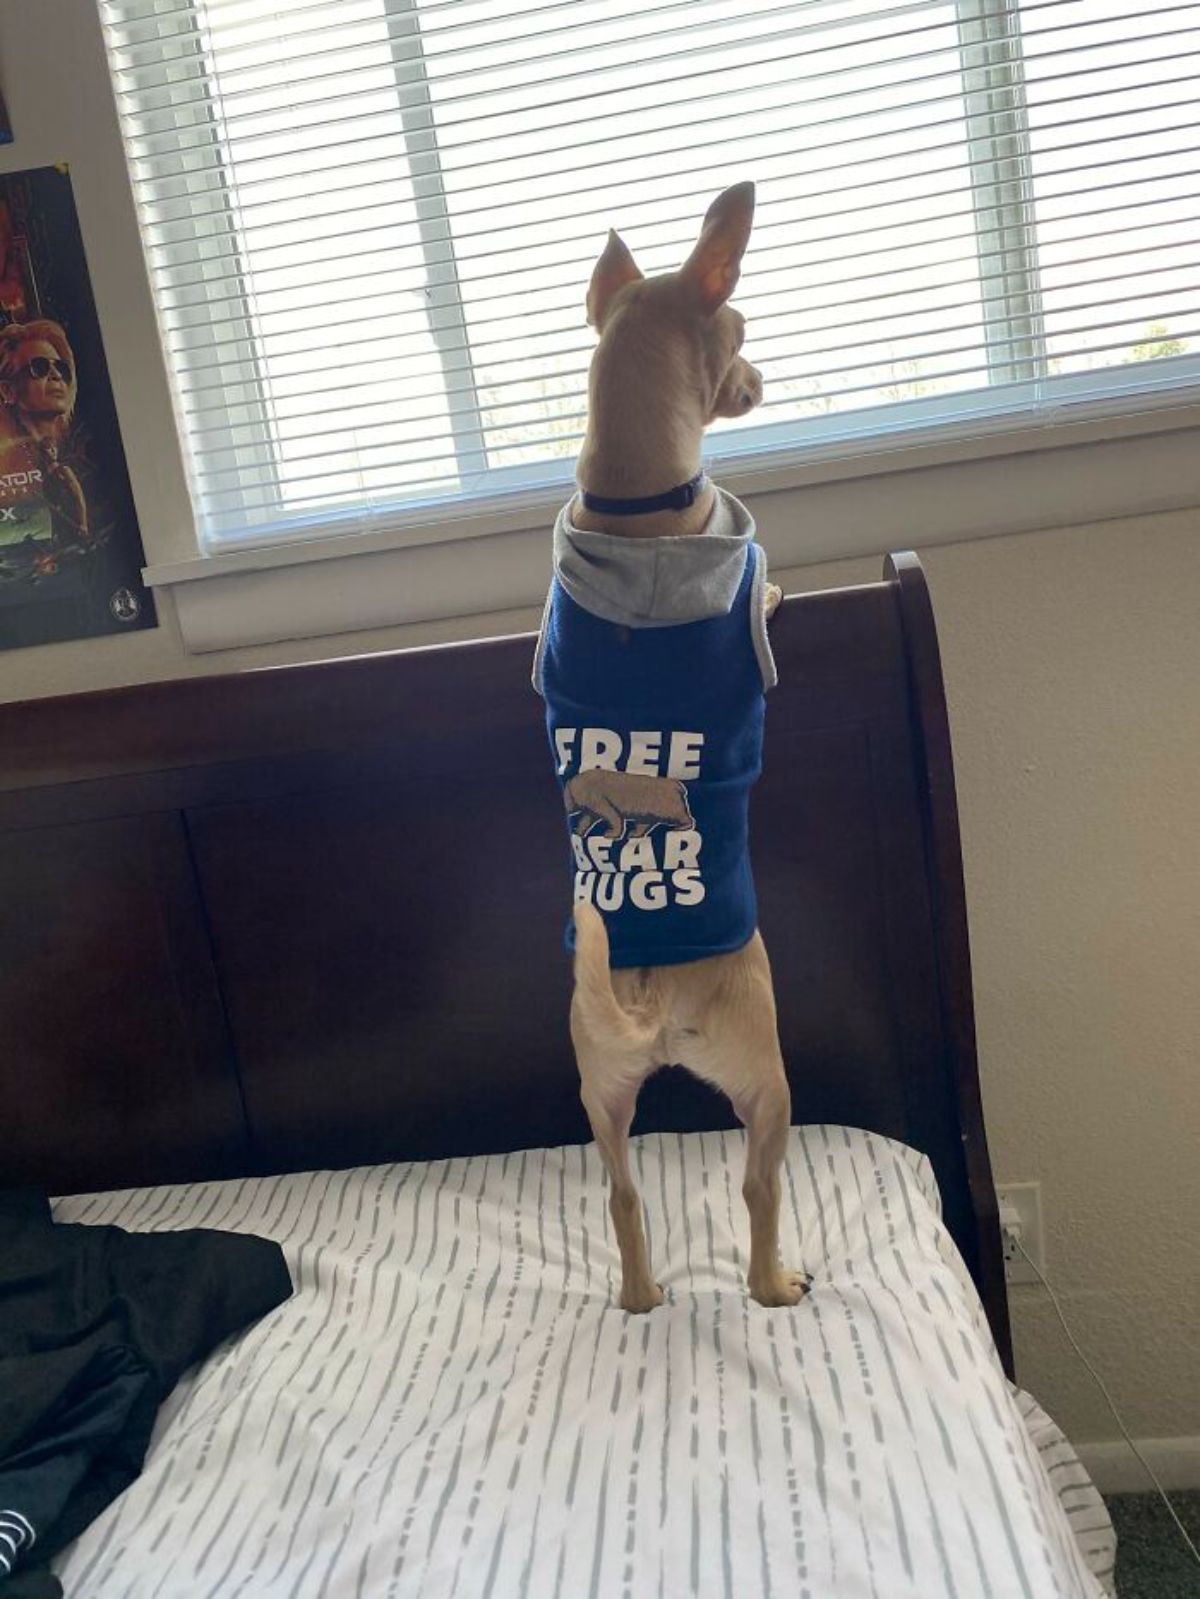 brown dog in blue and grey shirt standing on hind legs on a bed looking out of a window